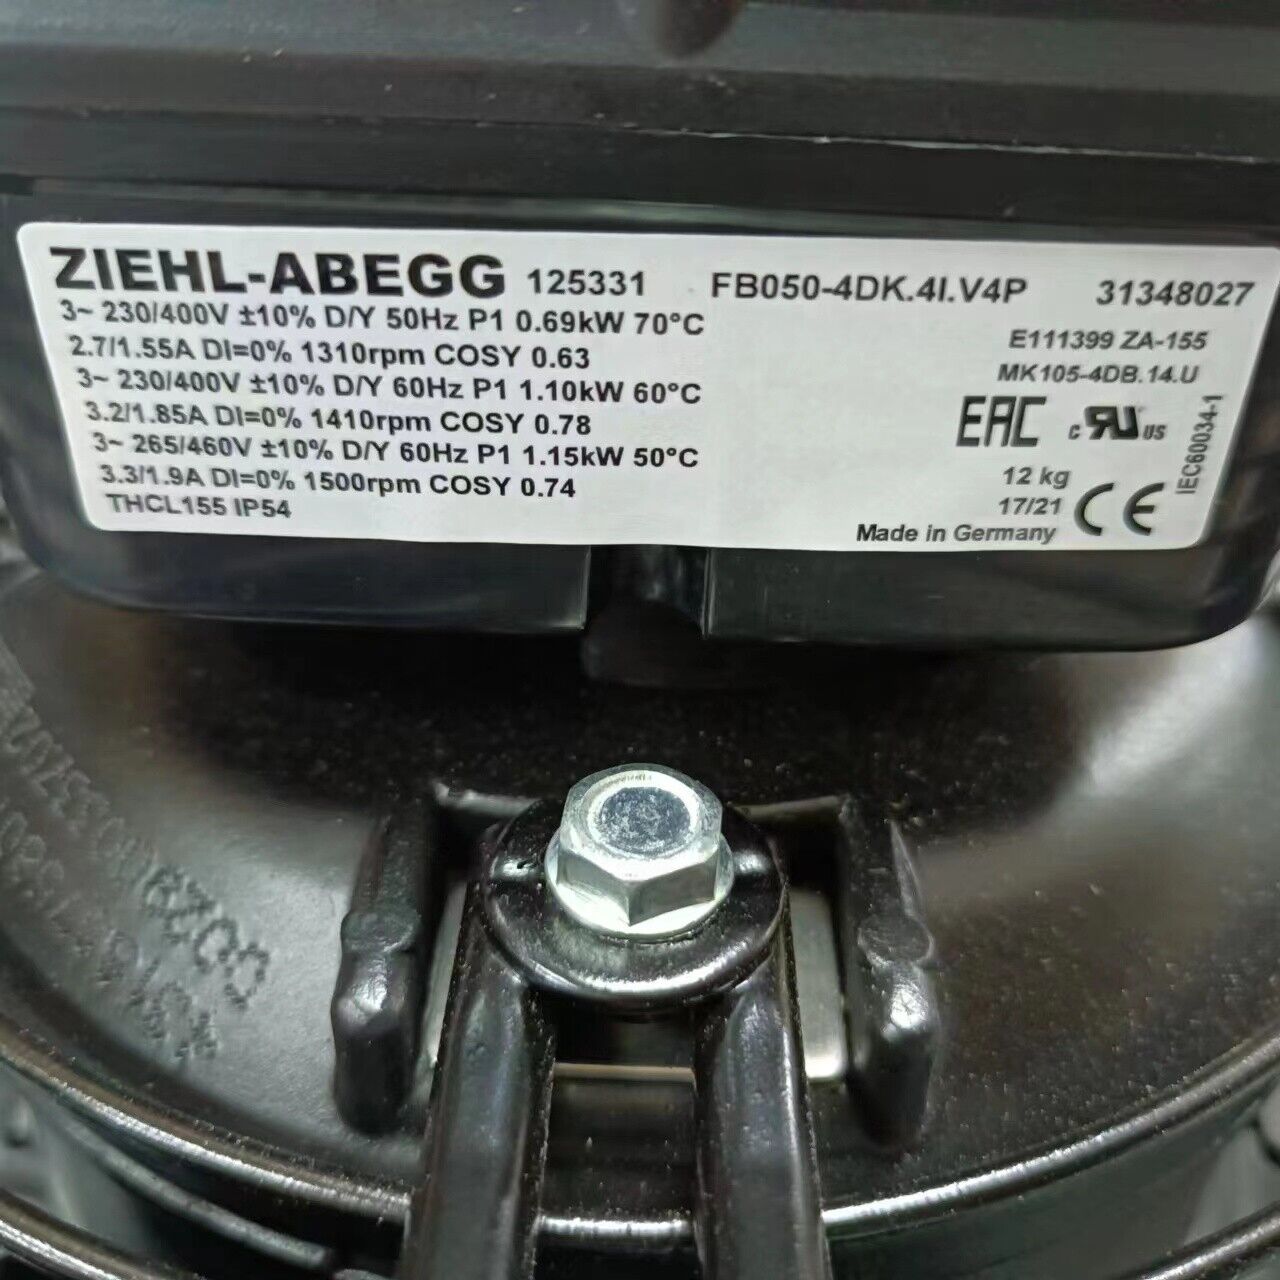 1PC ZIEHL-ABEGG FB050-4DK.4I.V4P Axial Flow Fan New Expedited Shipping